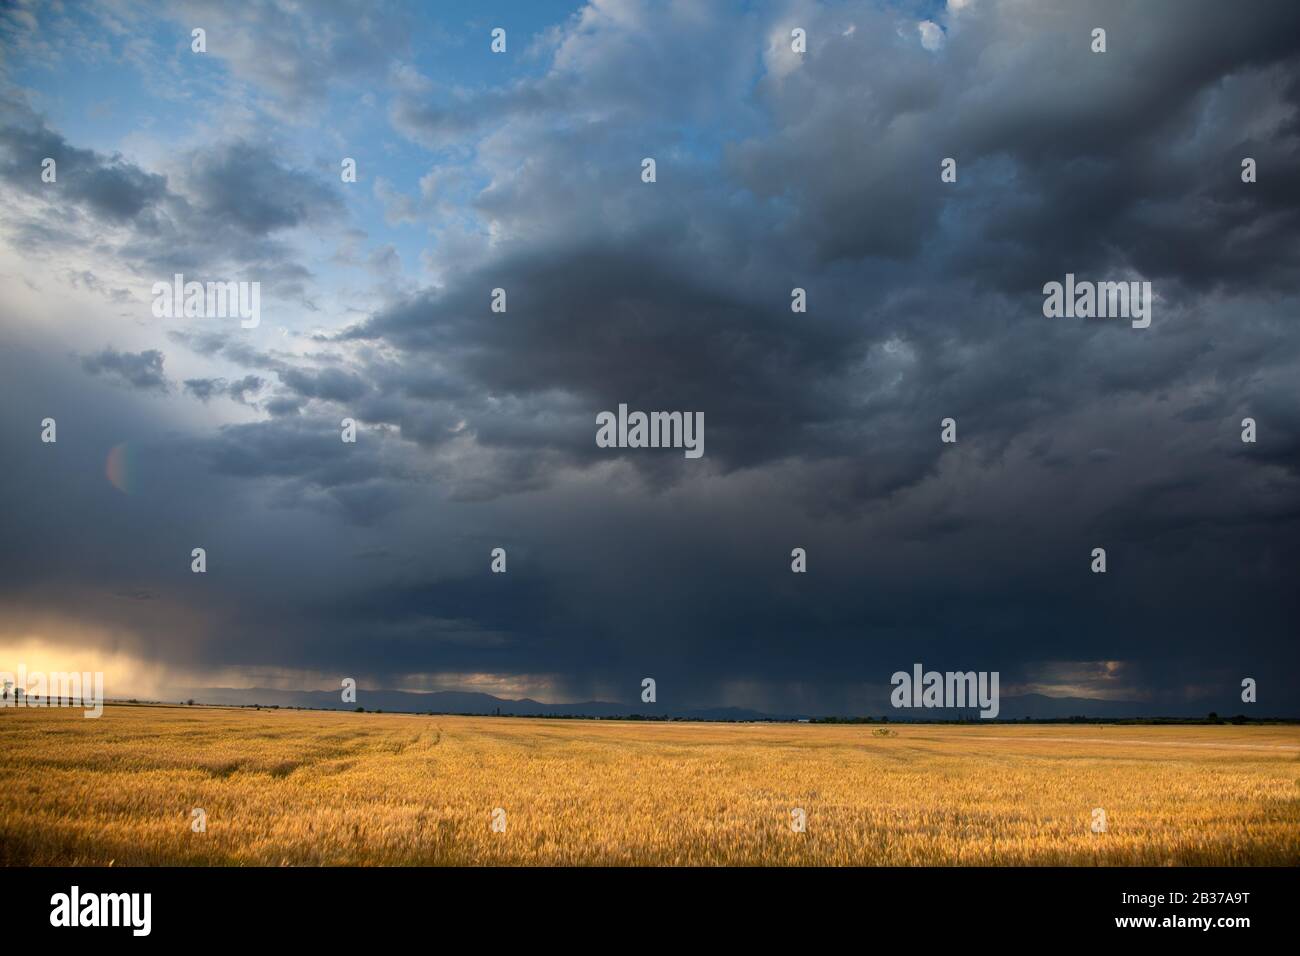 Landscape with ripe wheat field and coming heavy rain and storm in a summer day. Stock Photo